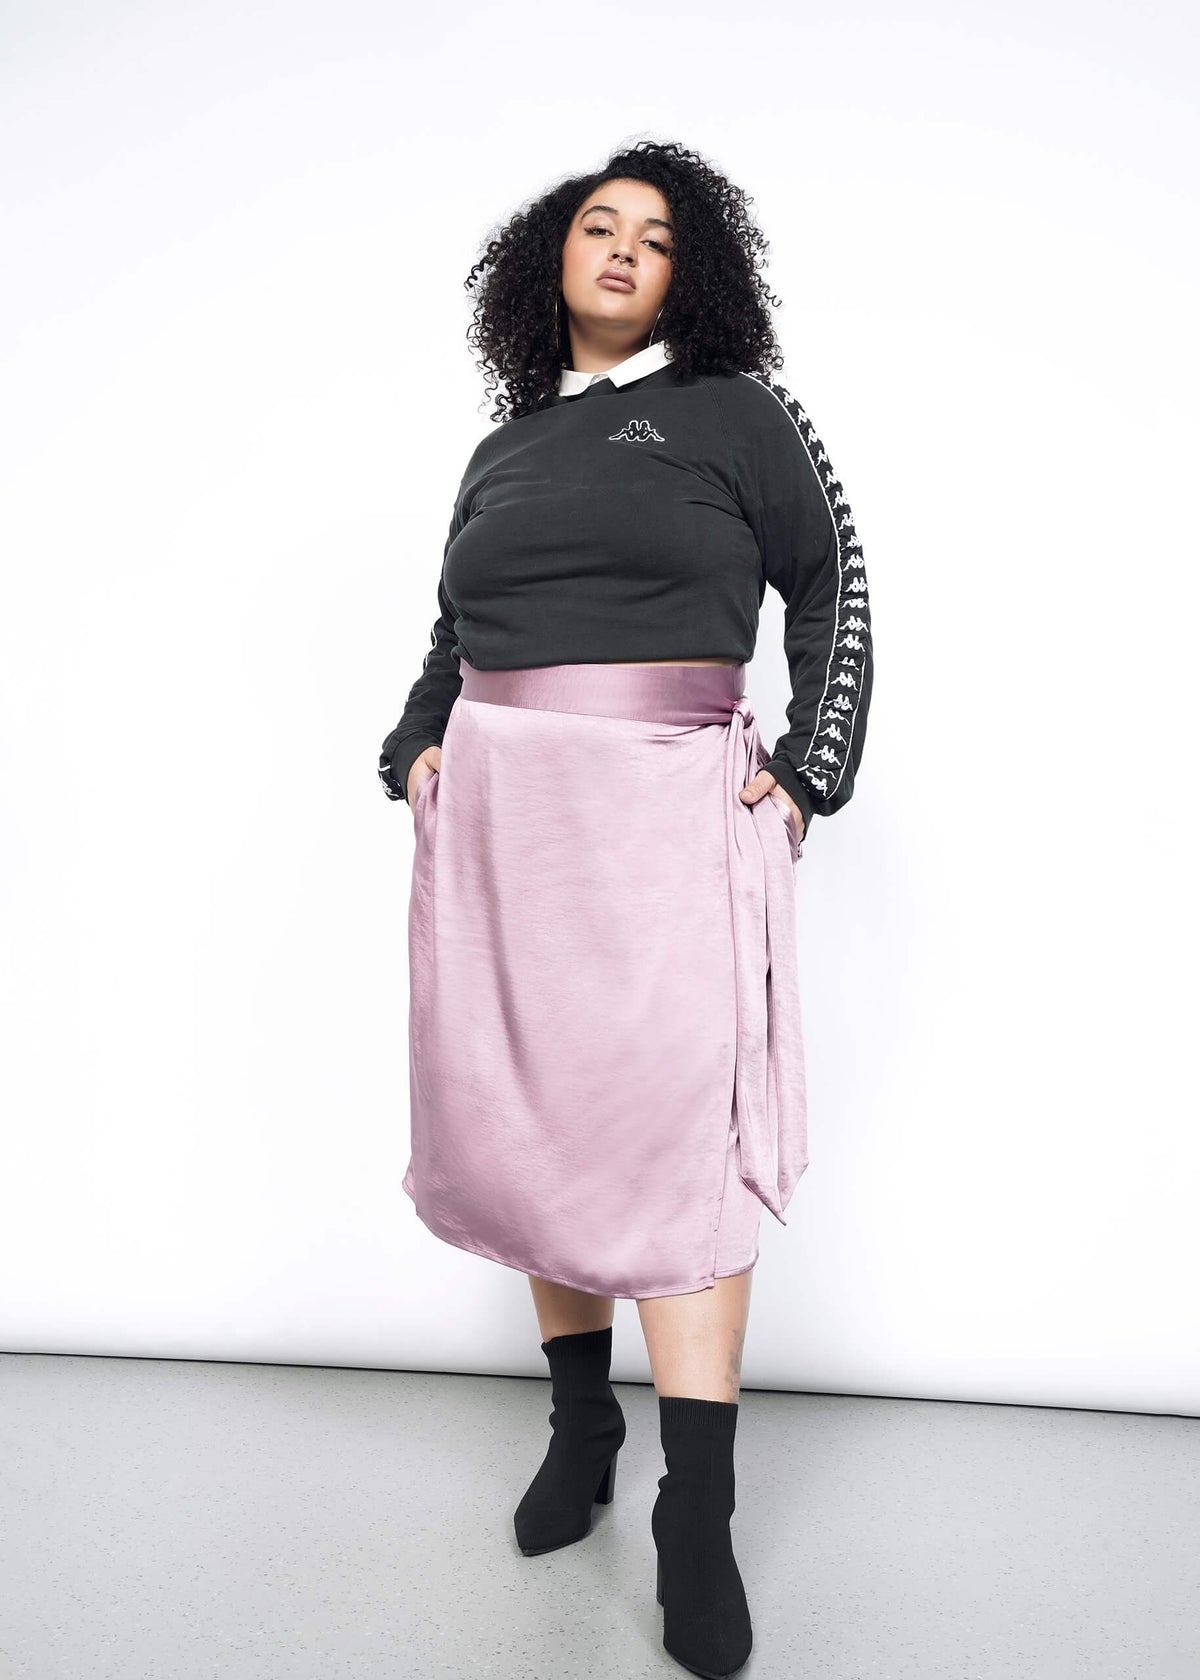 Model wearing the Empower Satin Wrap Skirt in Mauve in size 1X, with a black and white sweatshirt, and black heeled ankle boots.